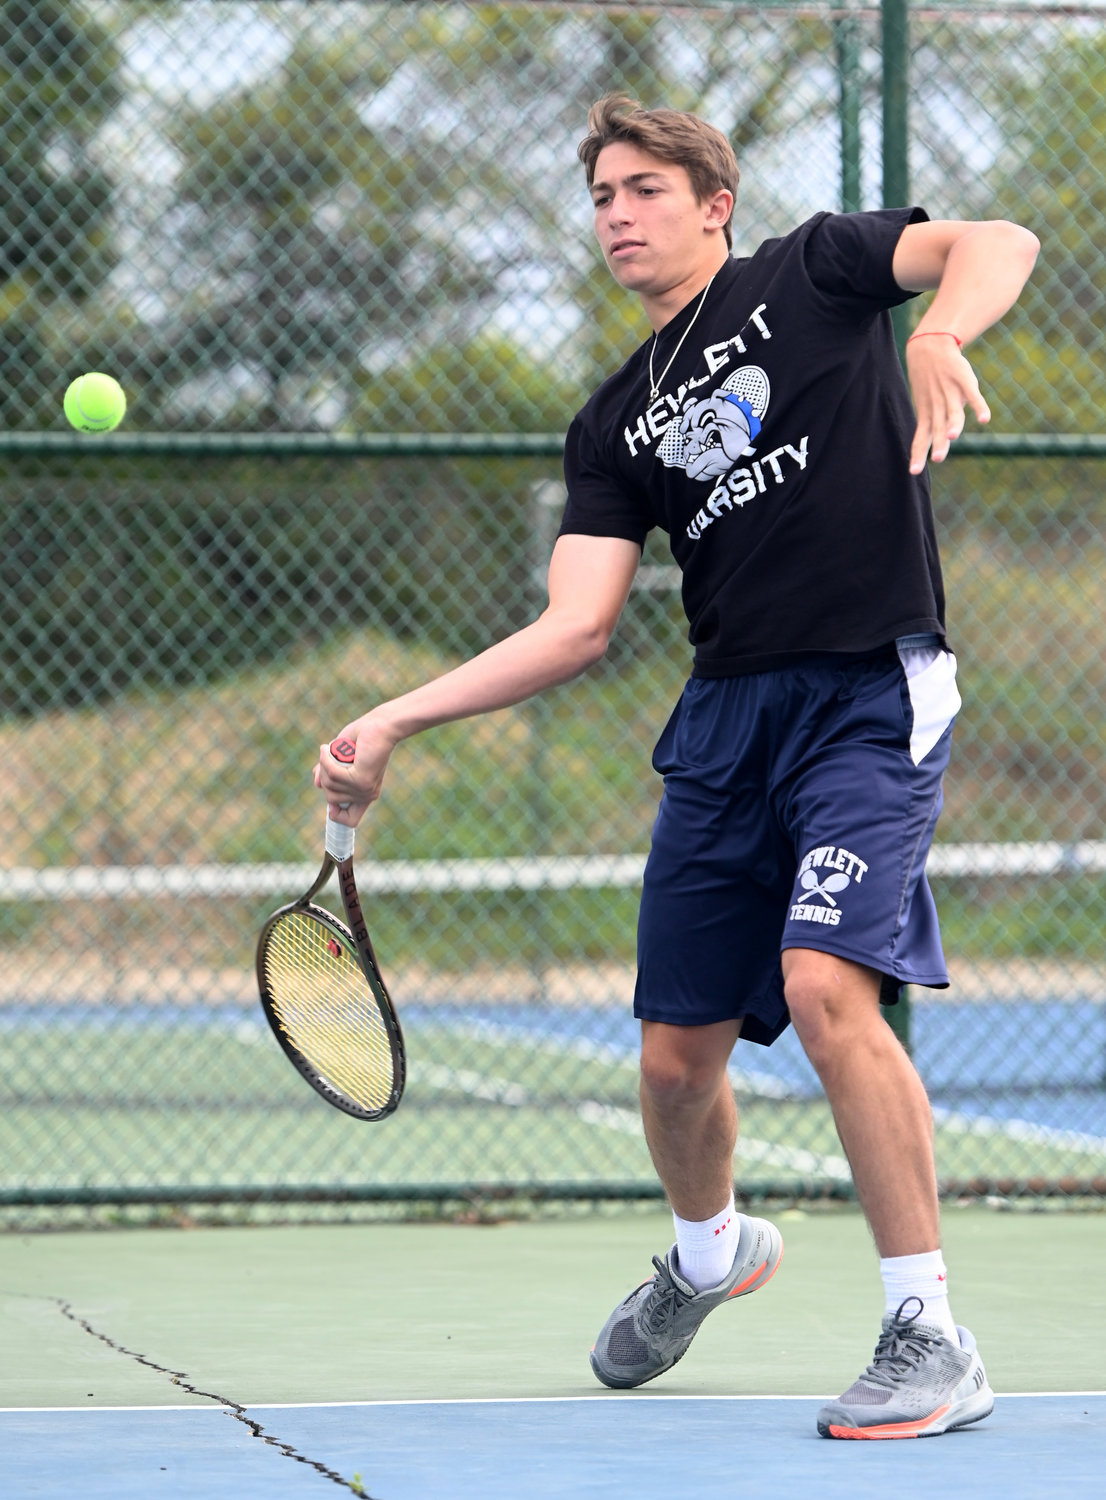 Hewlett junior Stephan Gershfeld is looking to repeat as Nassau County’s singles champion and make noise in the state tournament.